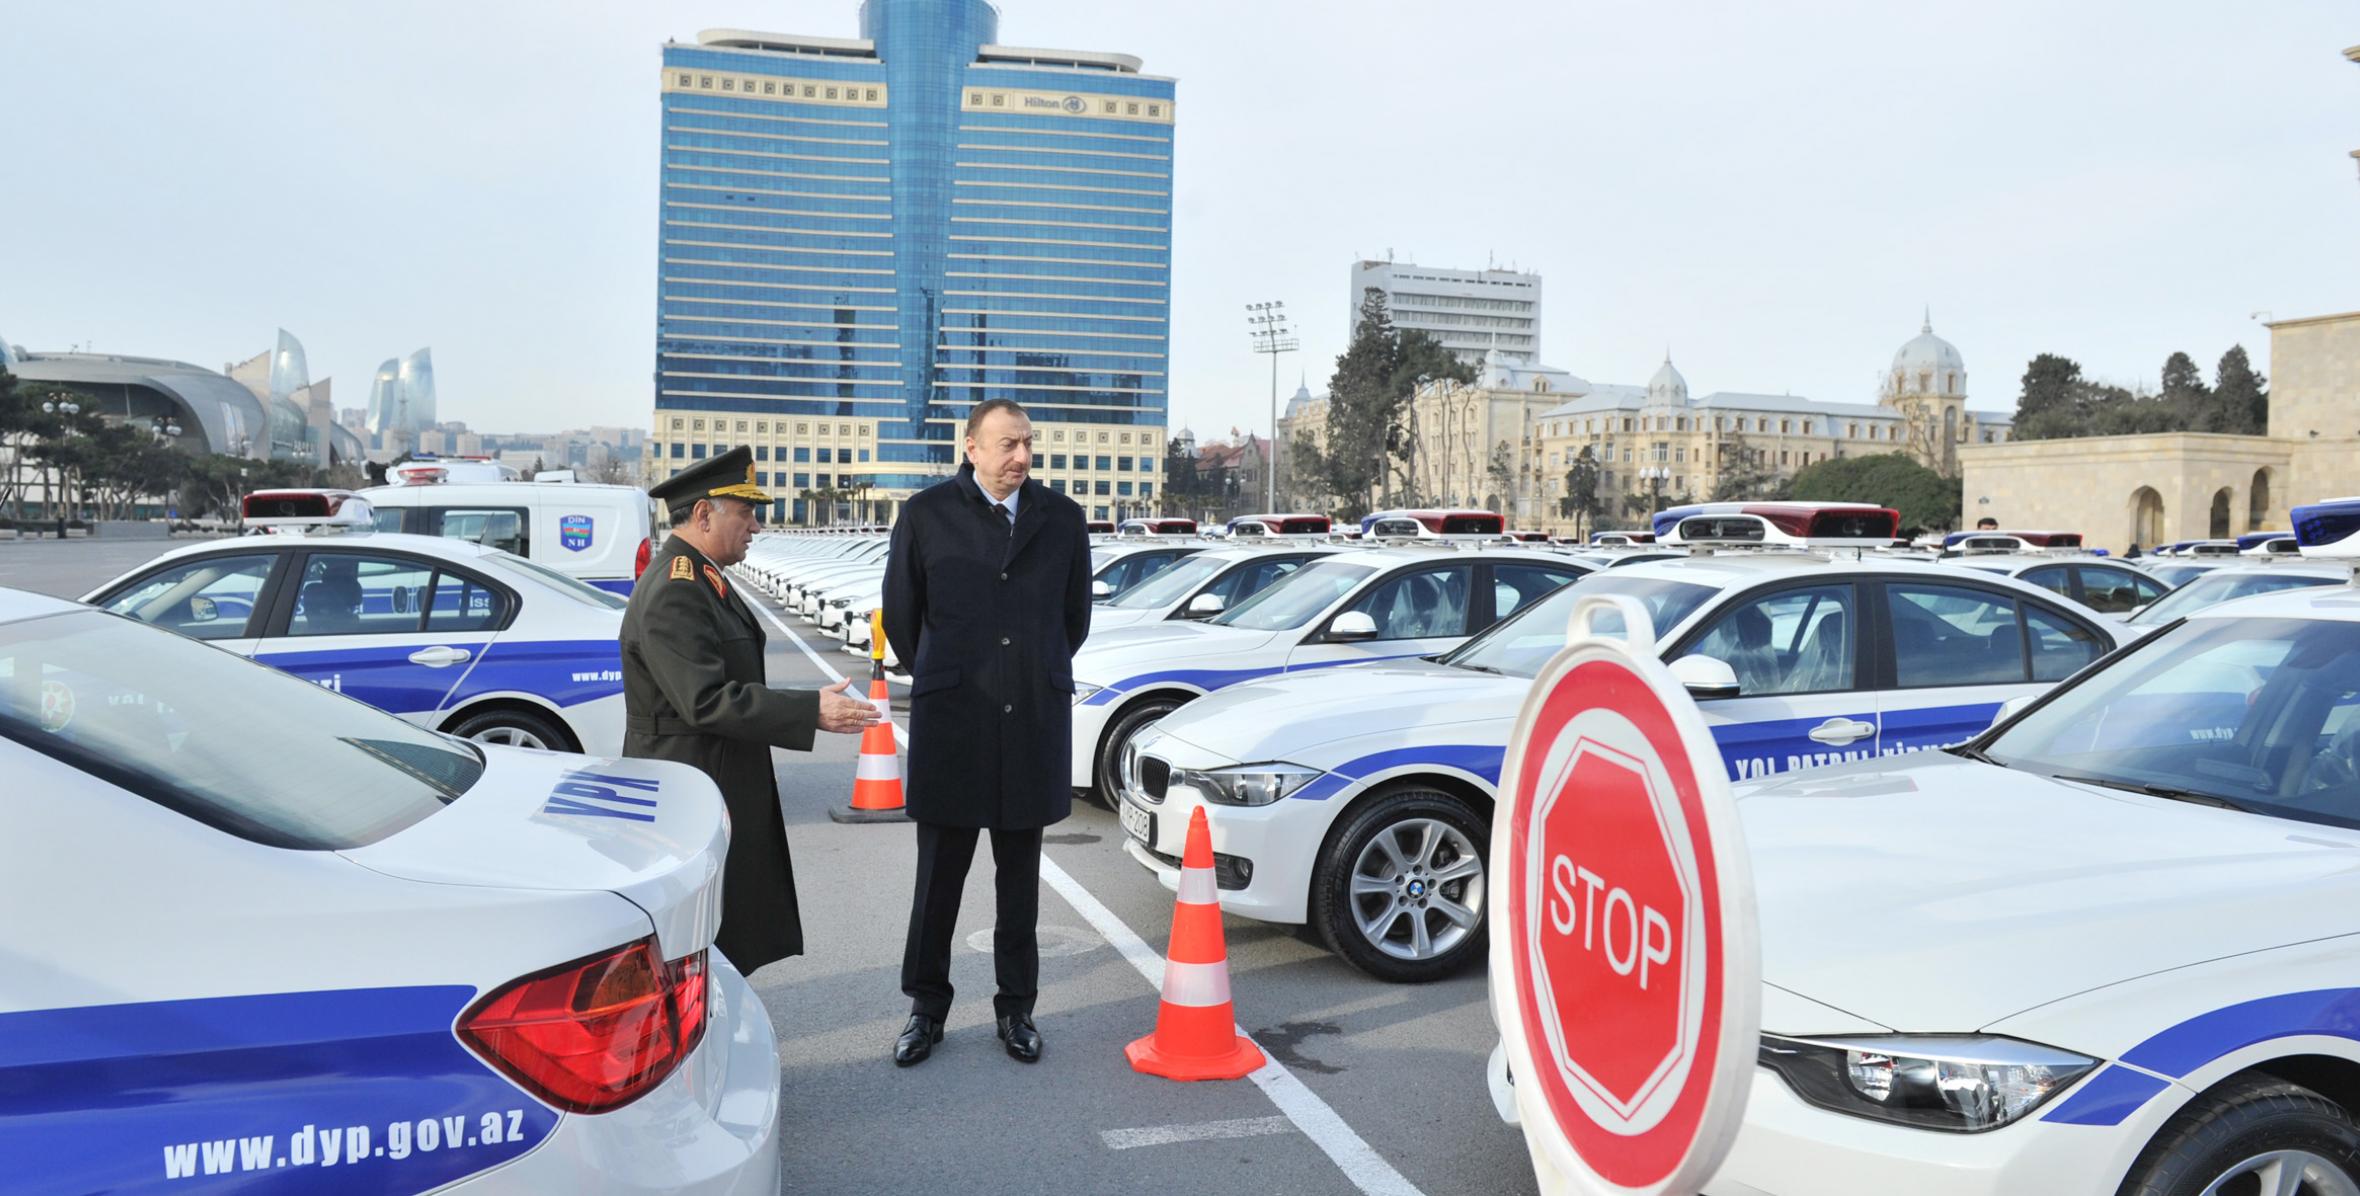 Ilham Aliyev attended a ceremony to unveil the newly-bought cars for agencies of the Ministry of Internal Affairs, including traffic police